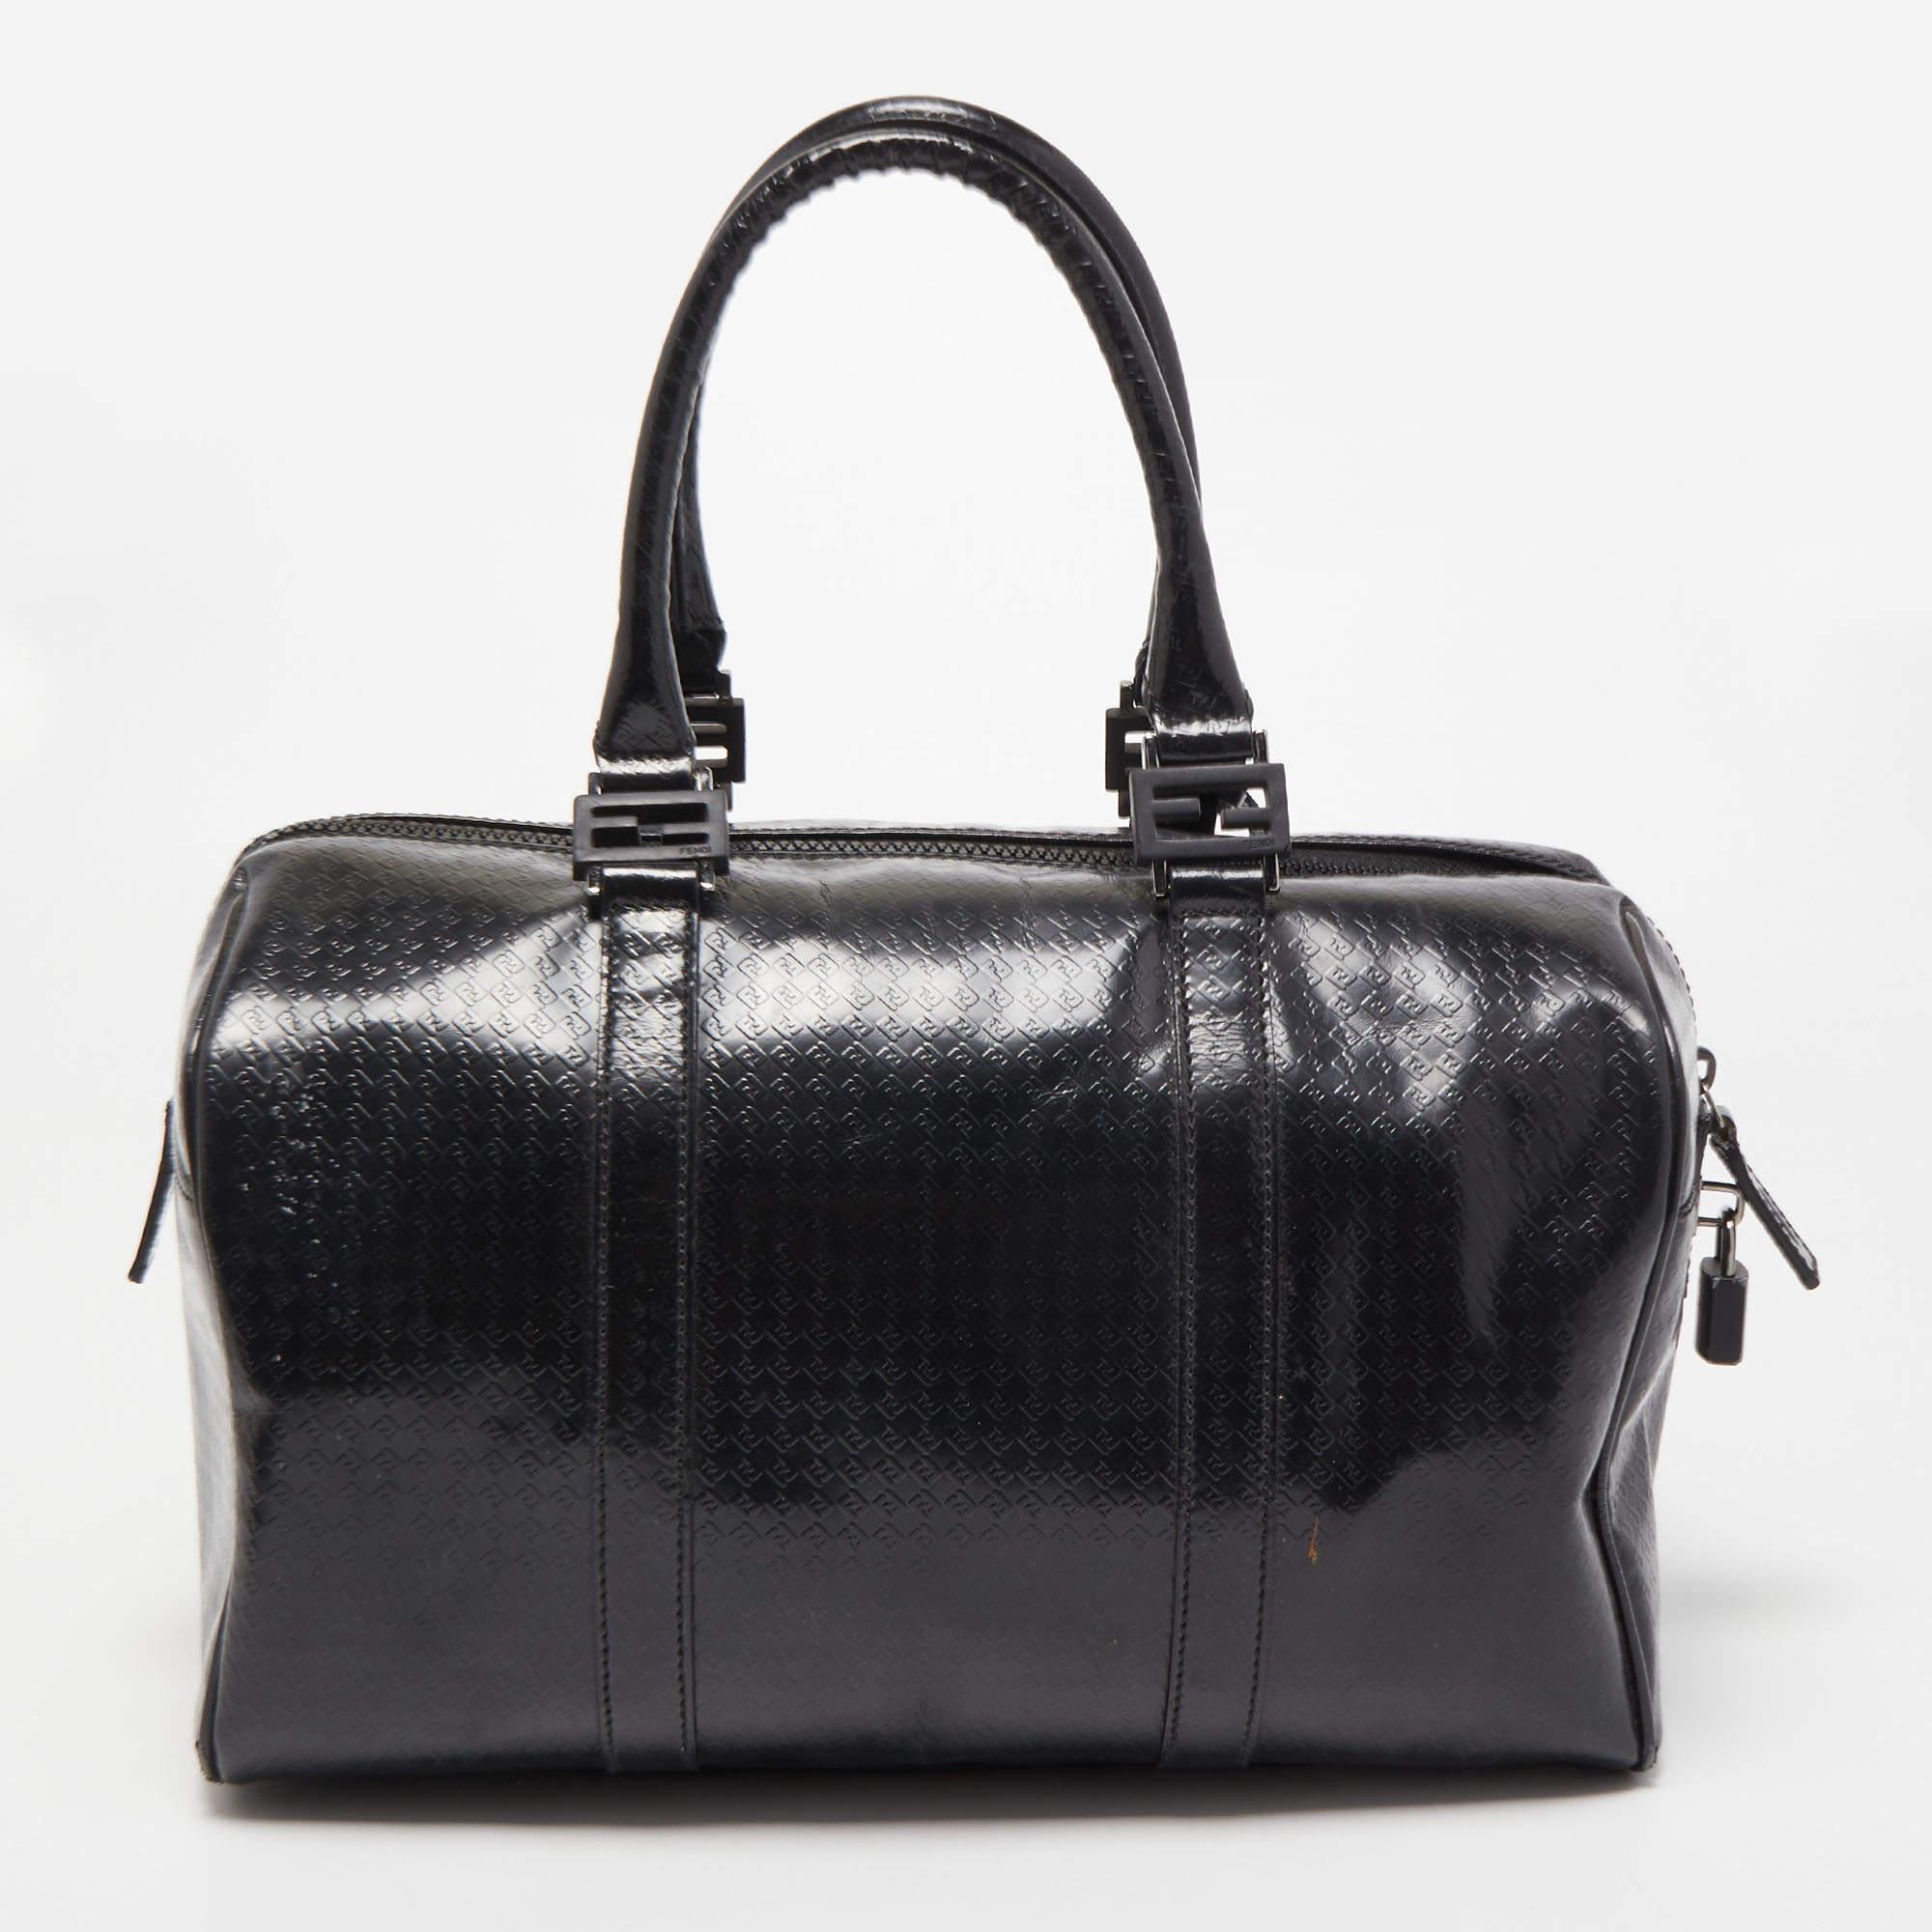 This Forever Bauletto Boston bag from Fendi is the perfect bag you've been searching for, all this while! The black creation is crafted from Zucca embossed leather and features dual top handles that are detailed with silver-tone brand logo buckles.